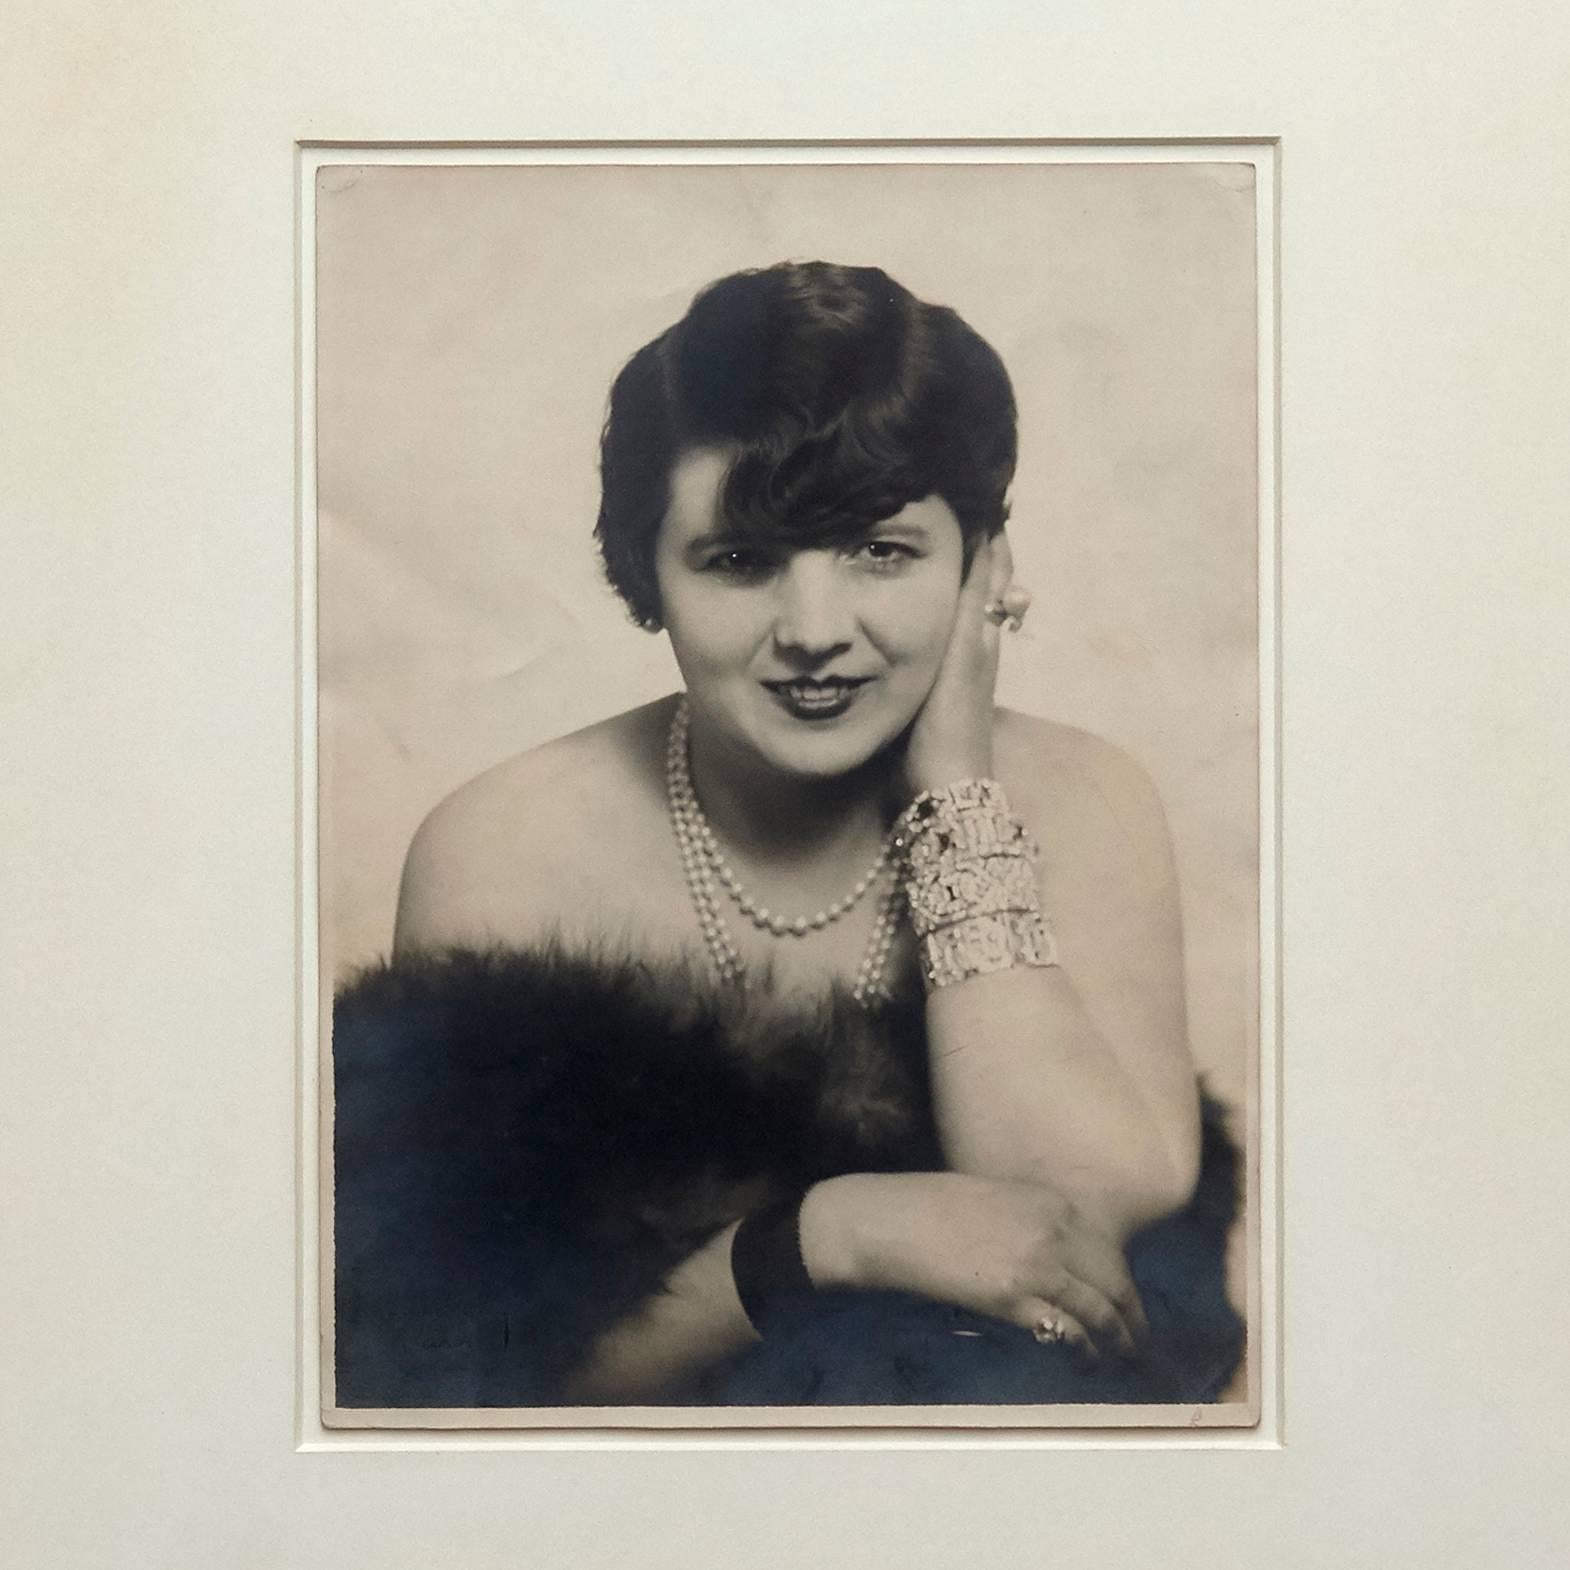 Man Ray photography of Gigi, 1927.

Hand signed in pencil.
Stamped by Man Ray Paris.

Born (Philadelphia, 1890-Paris, 1976) Emmanuel Radnitzky, Man Ray adopted his pseudonym in 1909, and would become one of the key figures of Dada and